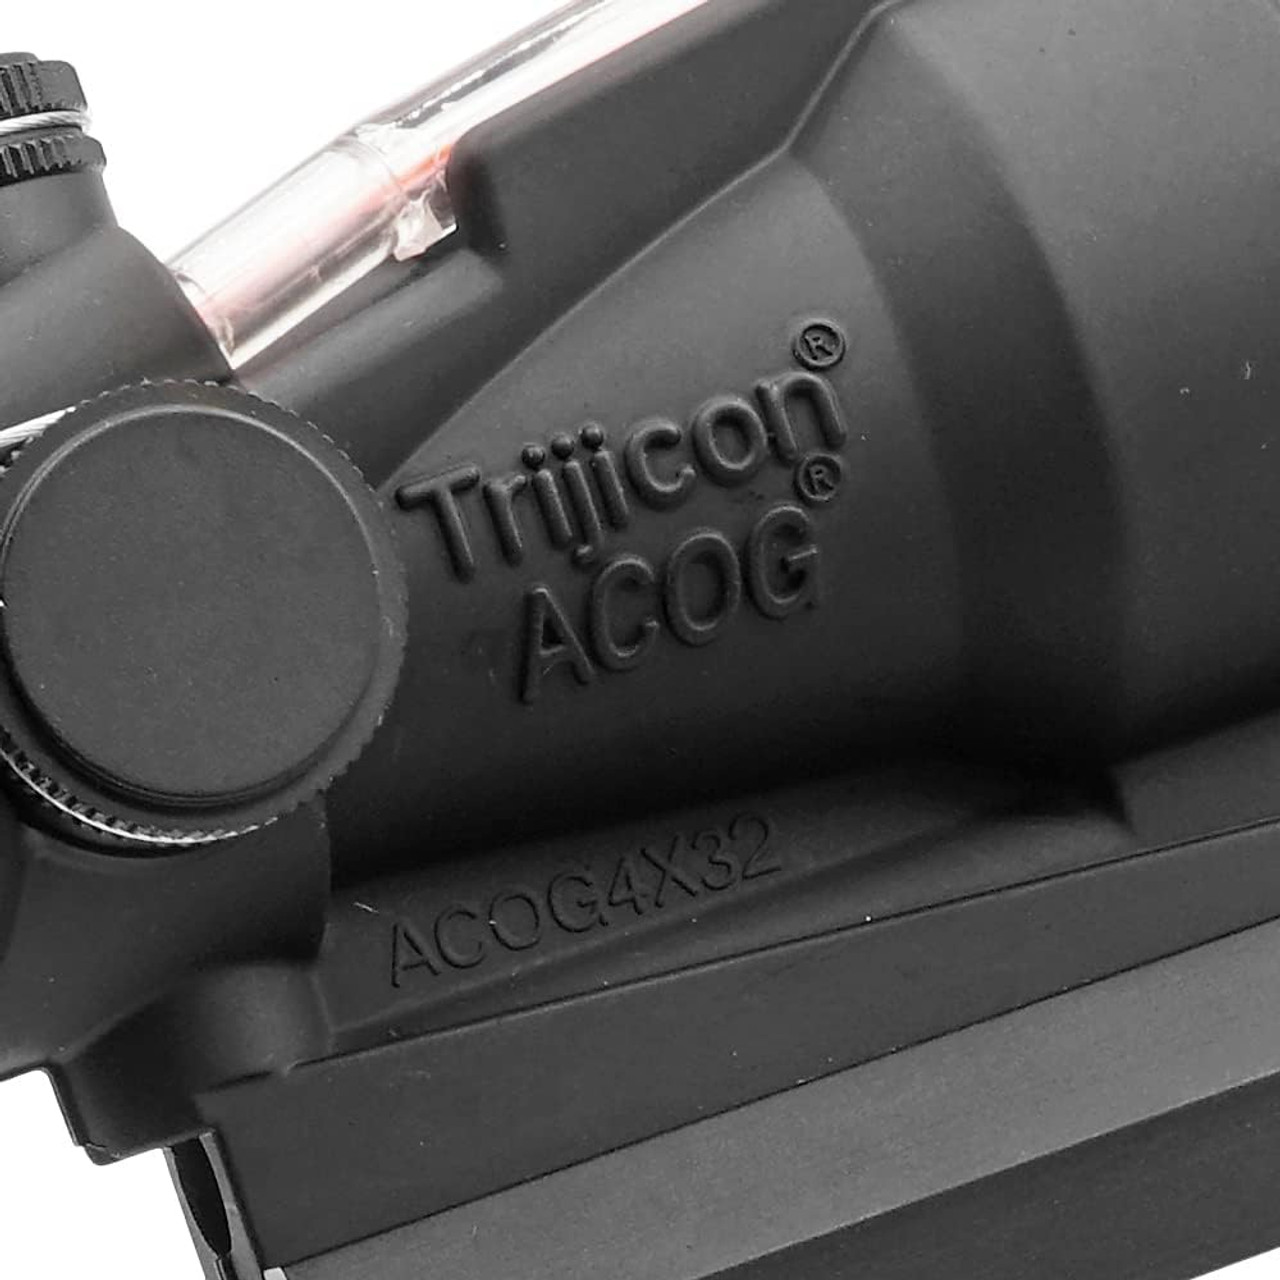 Trijicon ACOG TA31B 4 Magnification Rifle Scope & LaRue Type LT100 QD Mount Set (Fixed Magnification/U.S. Military Model/Equipped with Focusing Tube (Red)) Sight Replica Black 